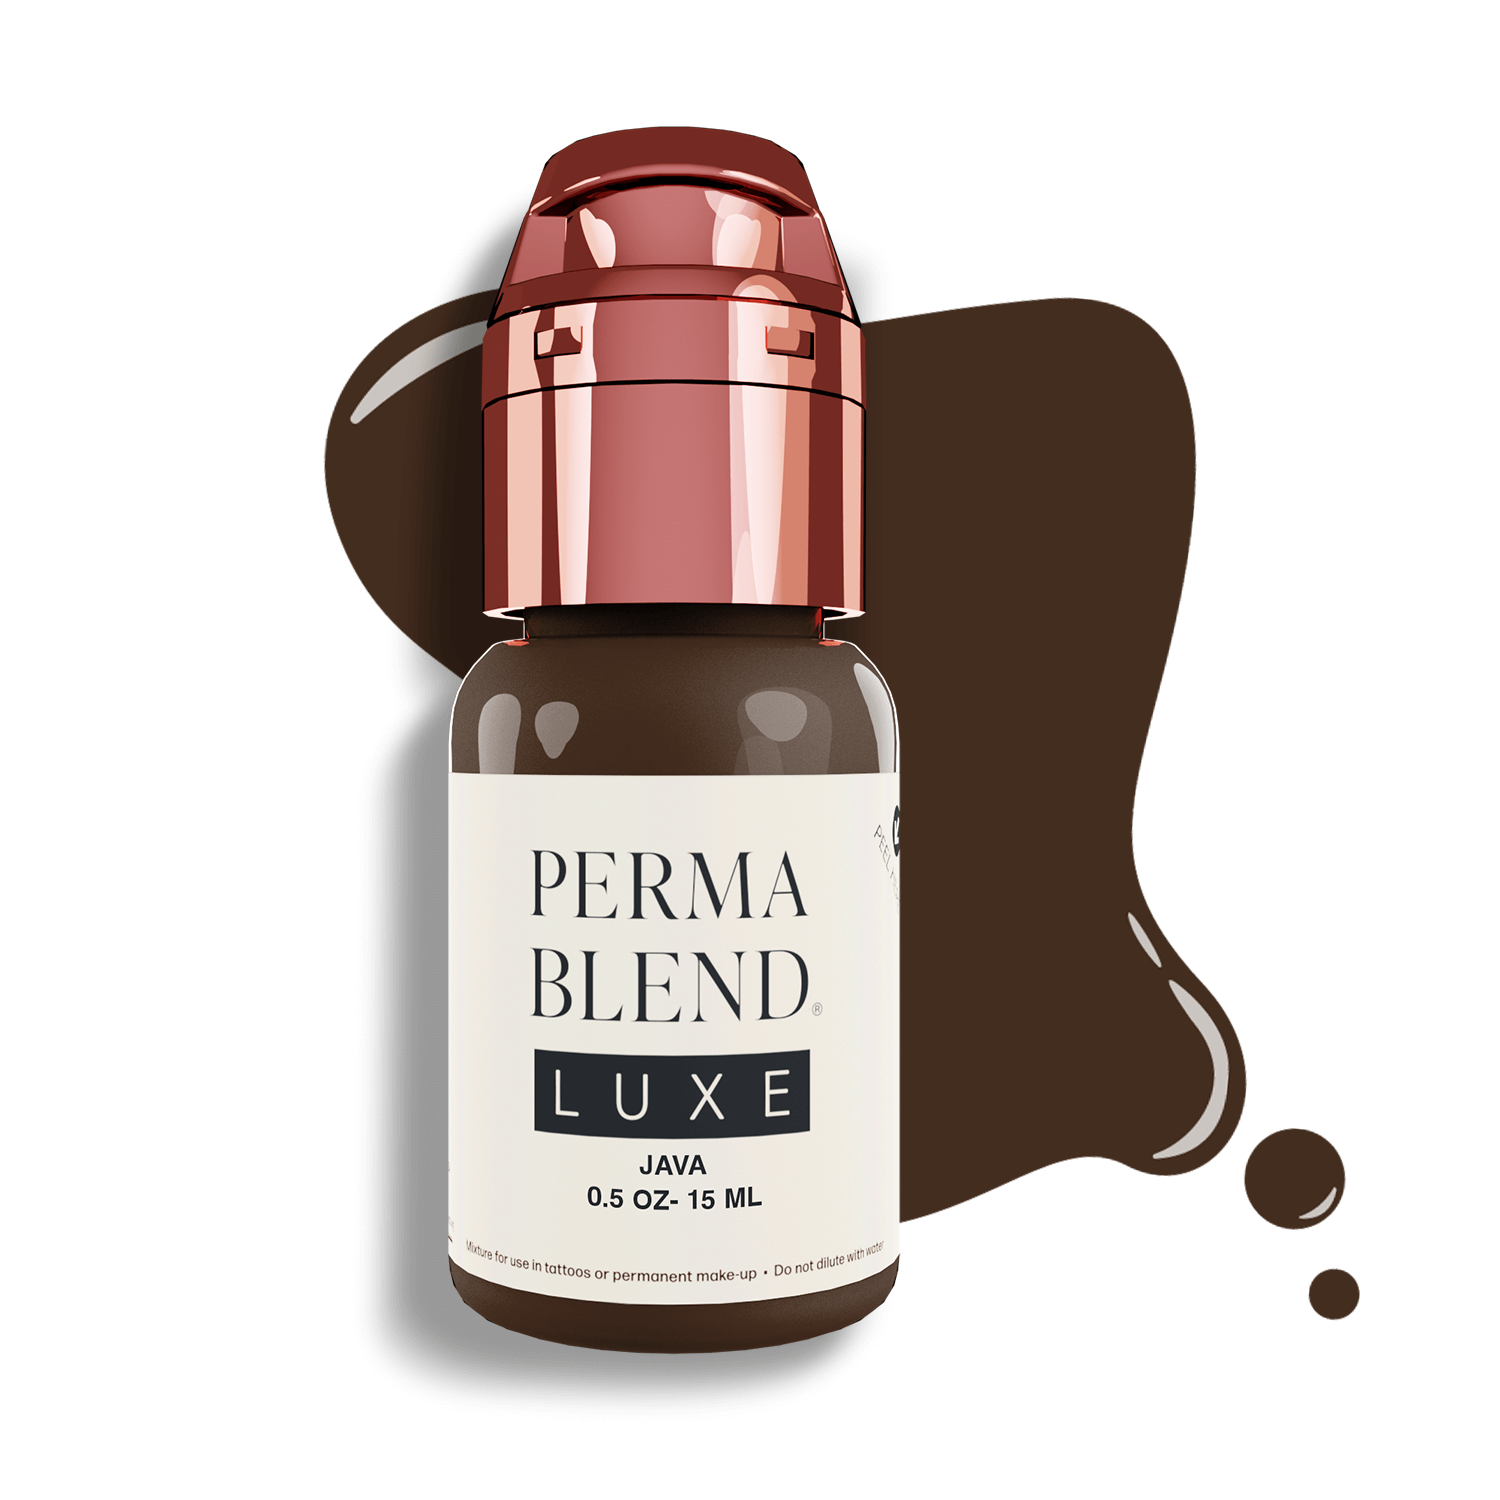 PermaBlend LUXE Eyebrow Pigment - Java